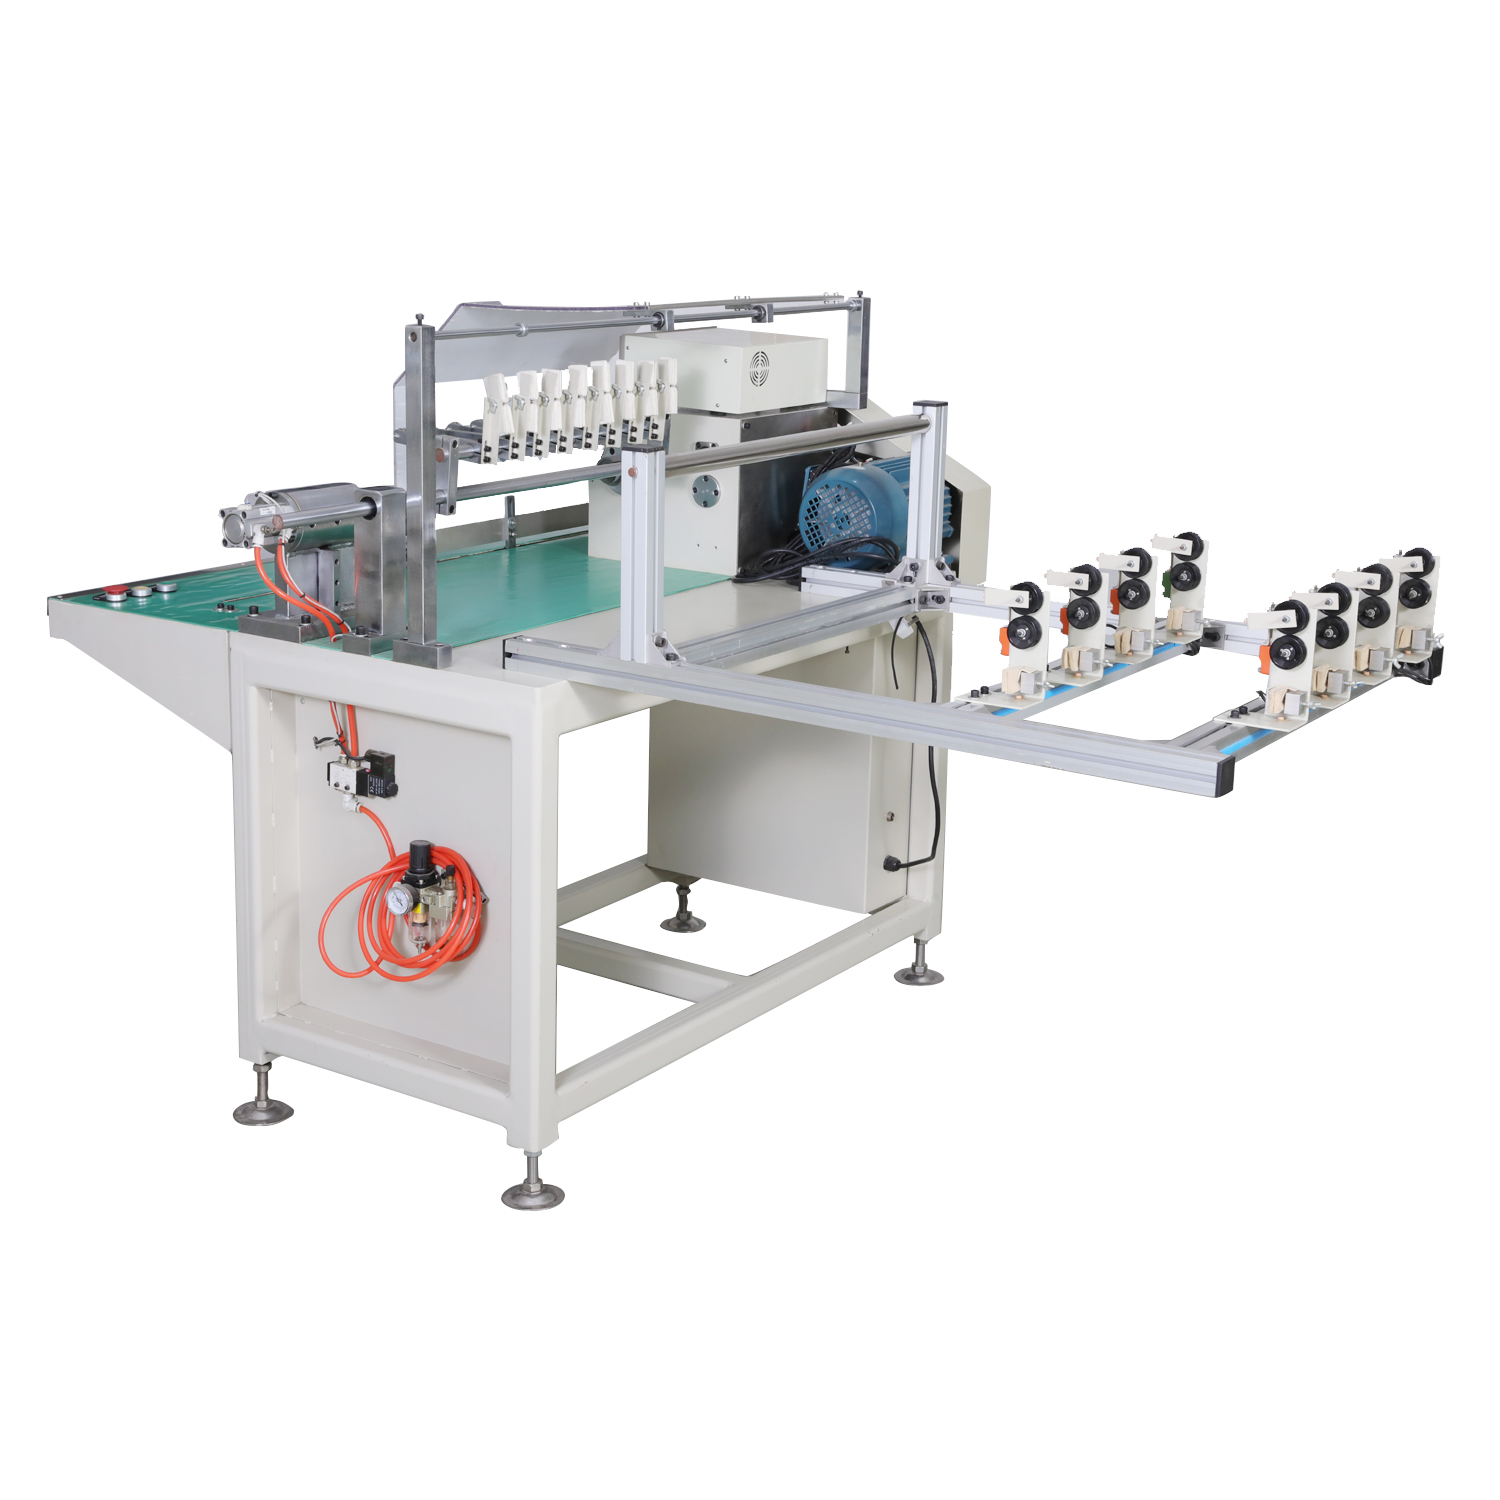 Simply stator coil winding machine (9)